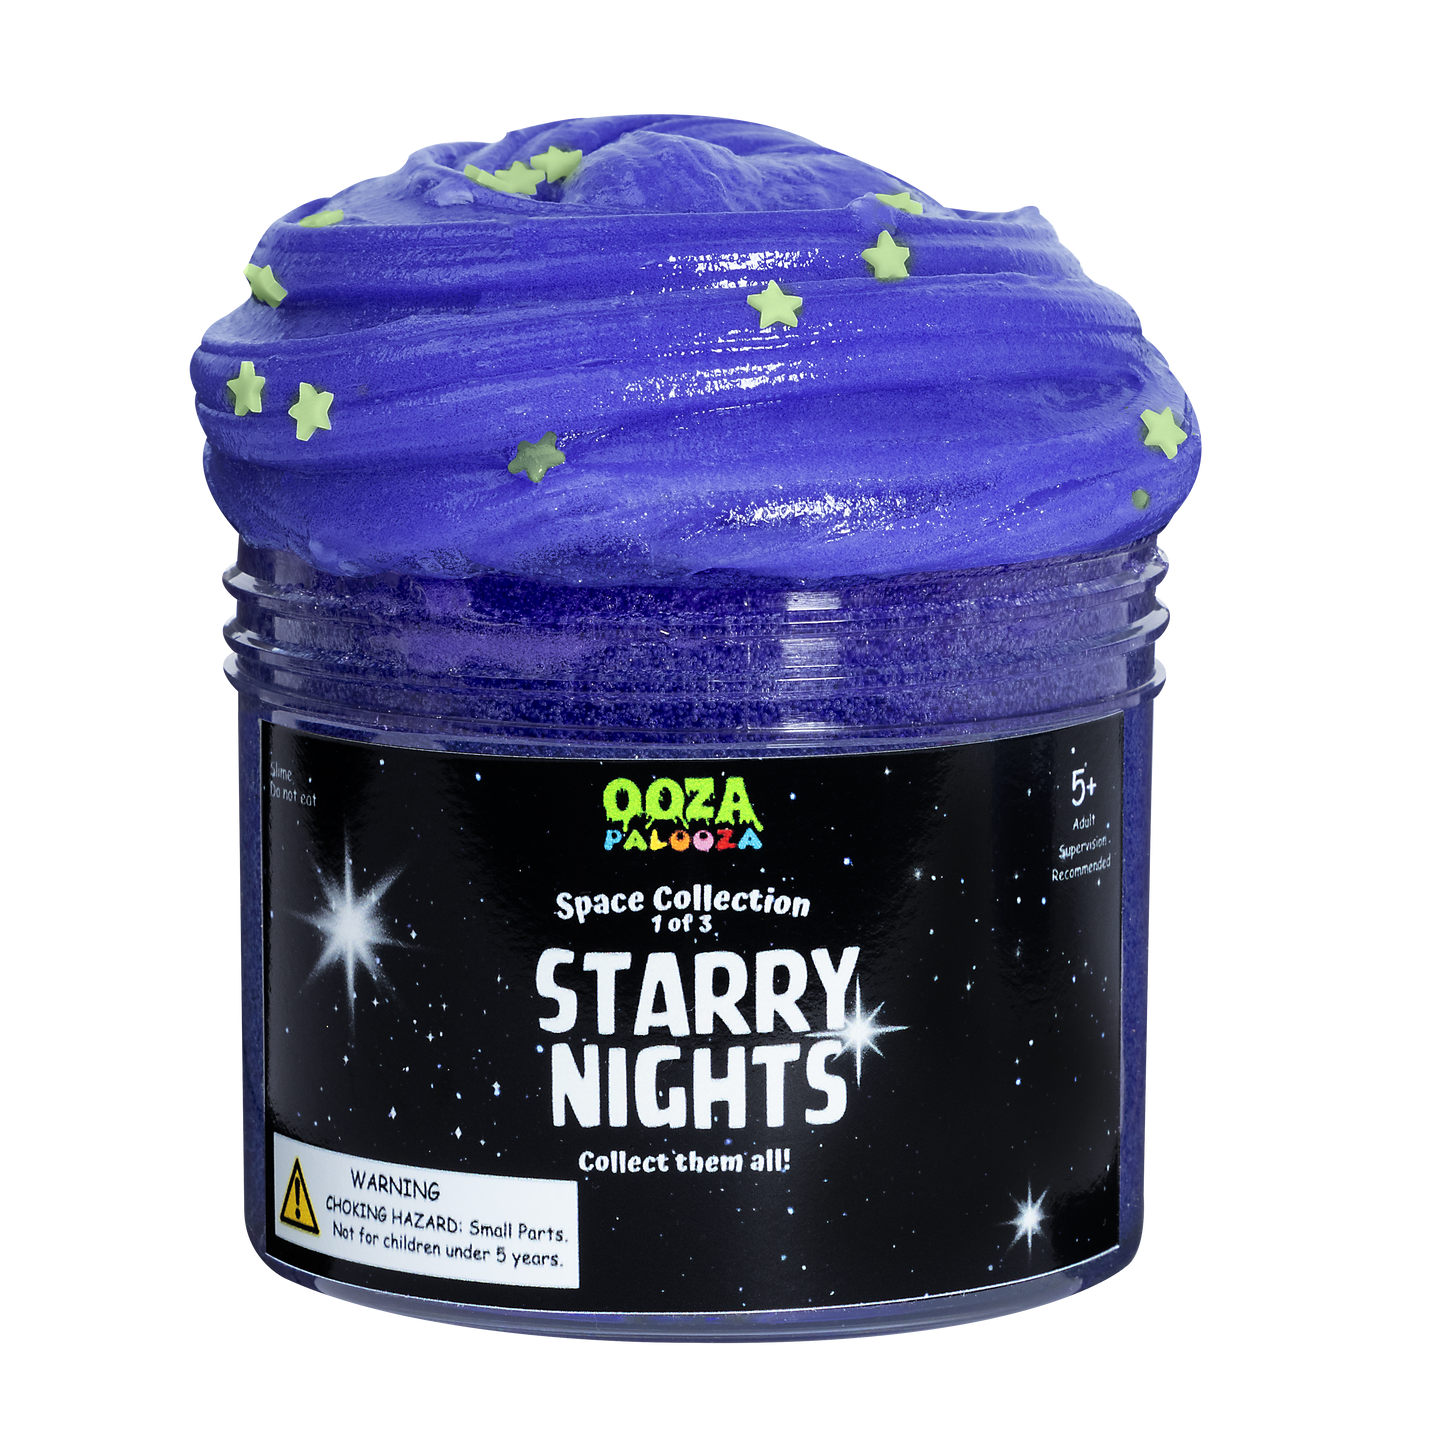 Starry Nights Slime (with glow in the dark stars)